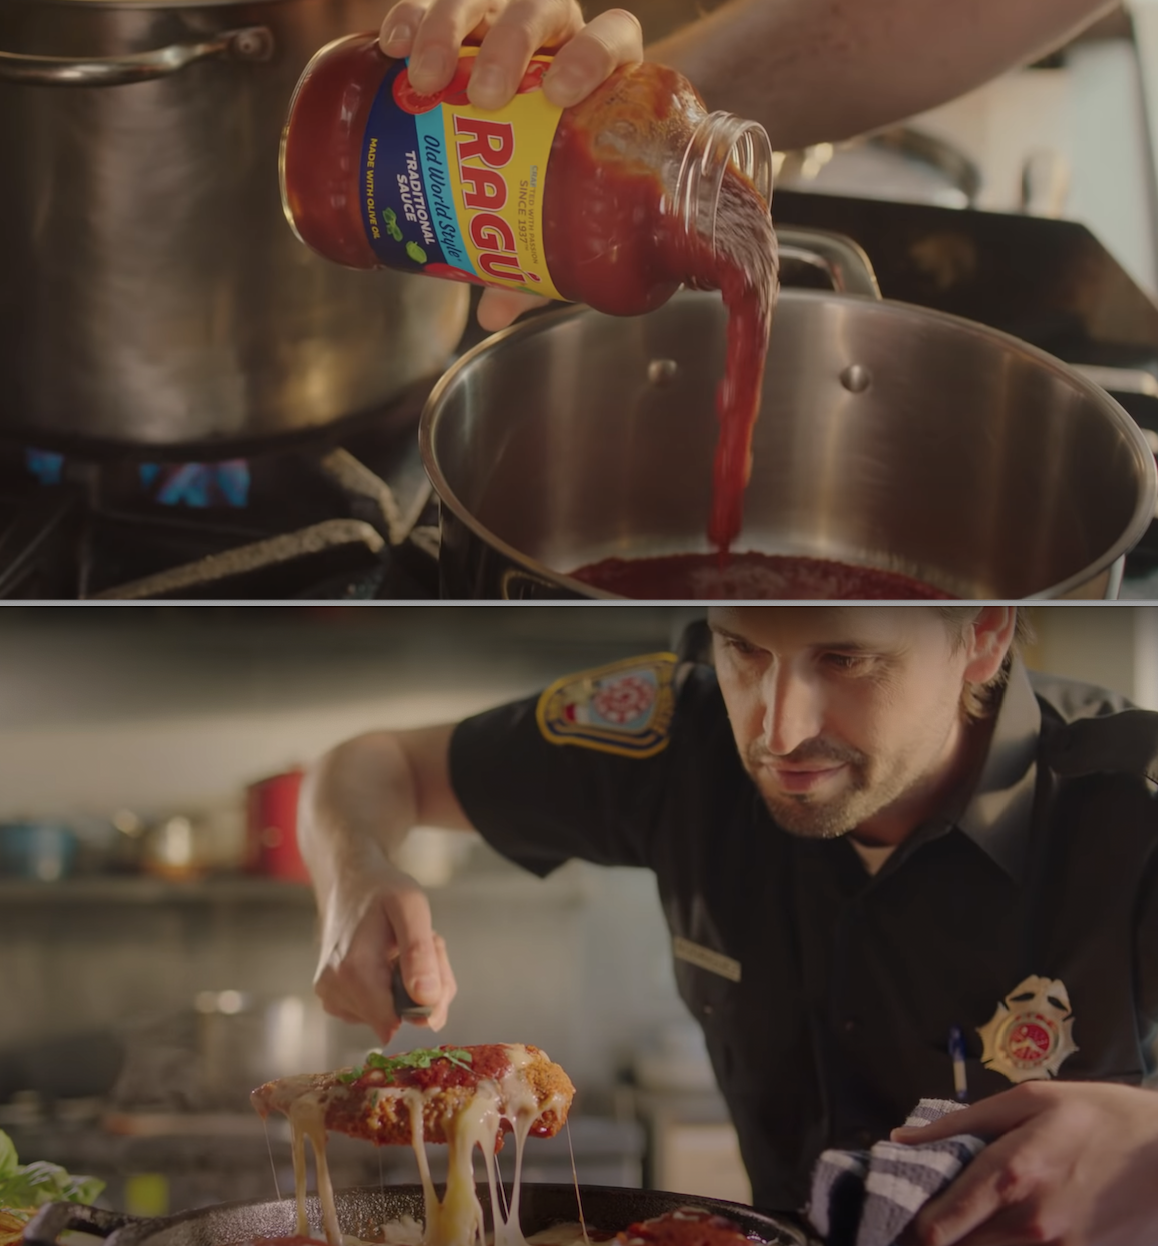 A commercial of someone pouring Ragú sauce into a pot and then lifting chicken Parm with a spatula